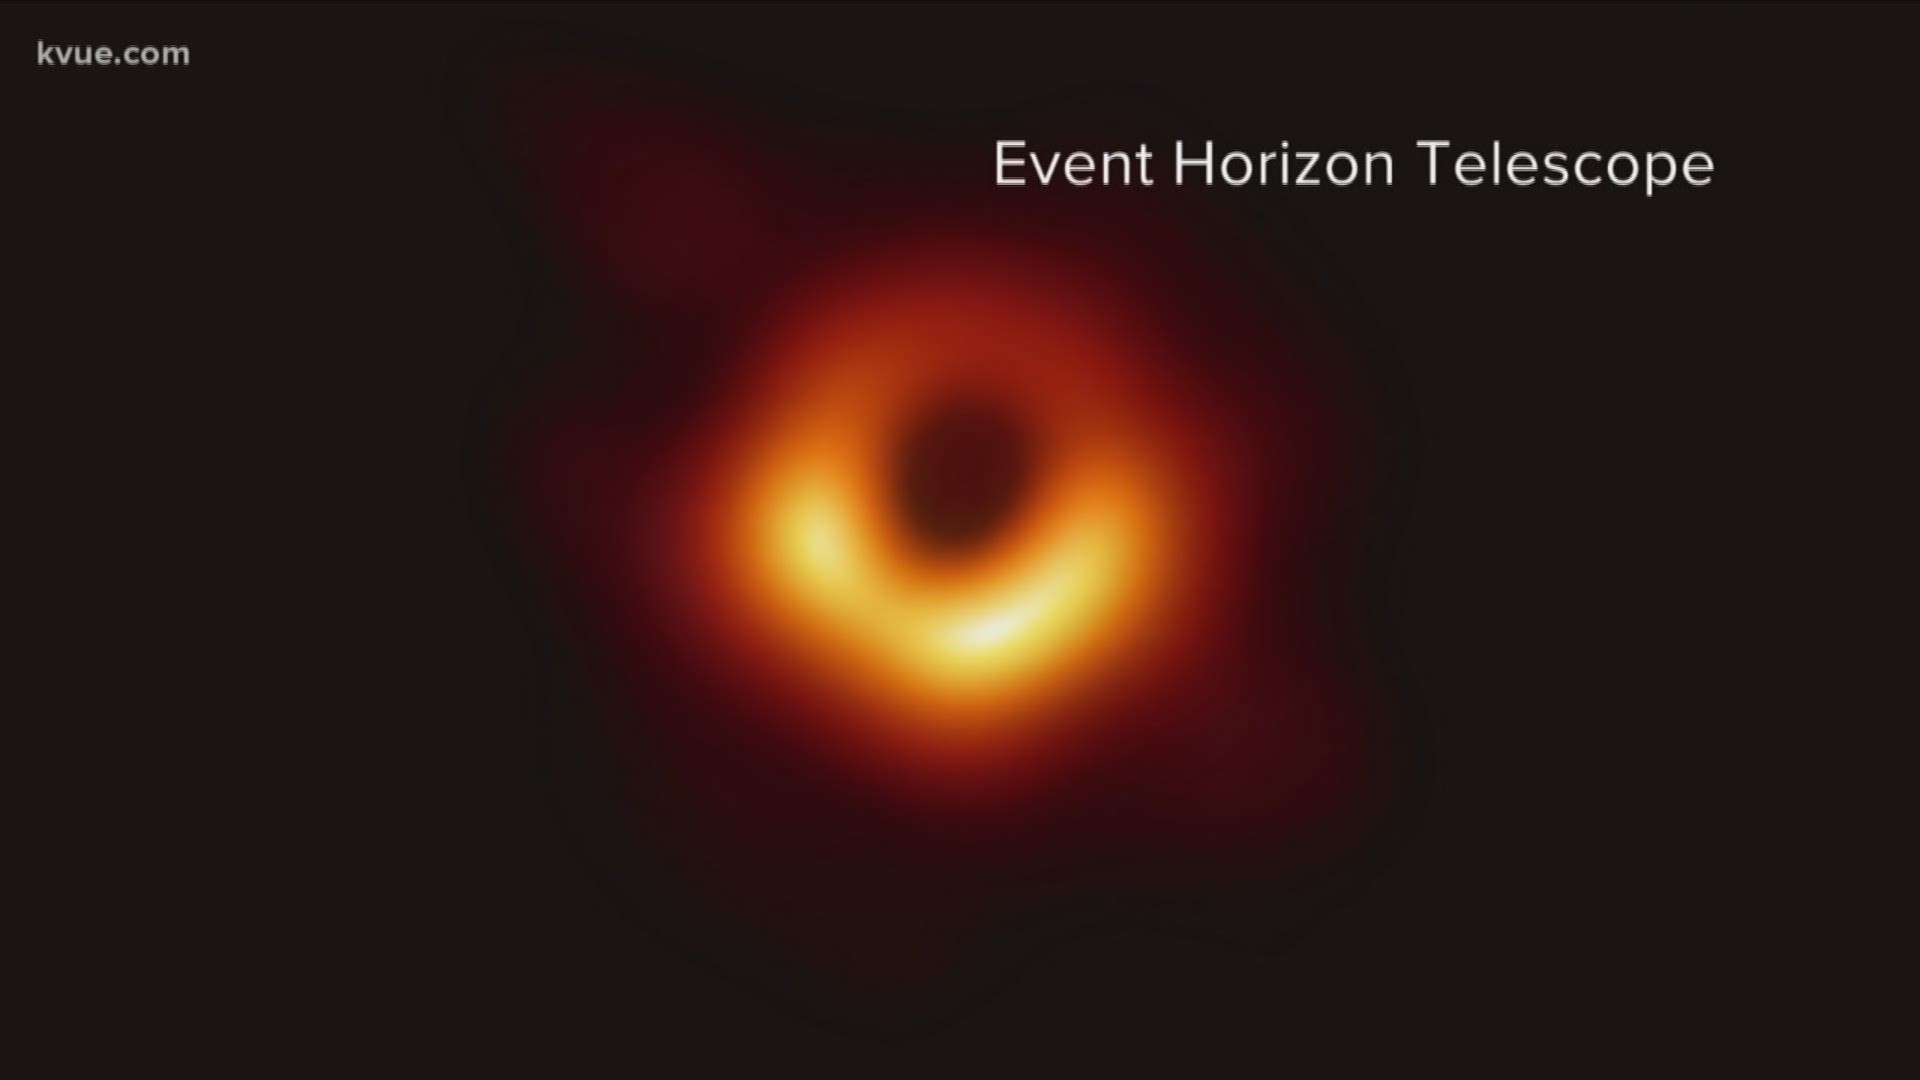 KVUE spoke to a UT professor about what the first-ever picture of a black hole means for the astronomy world.